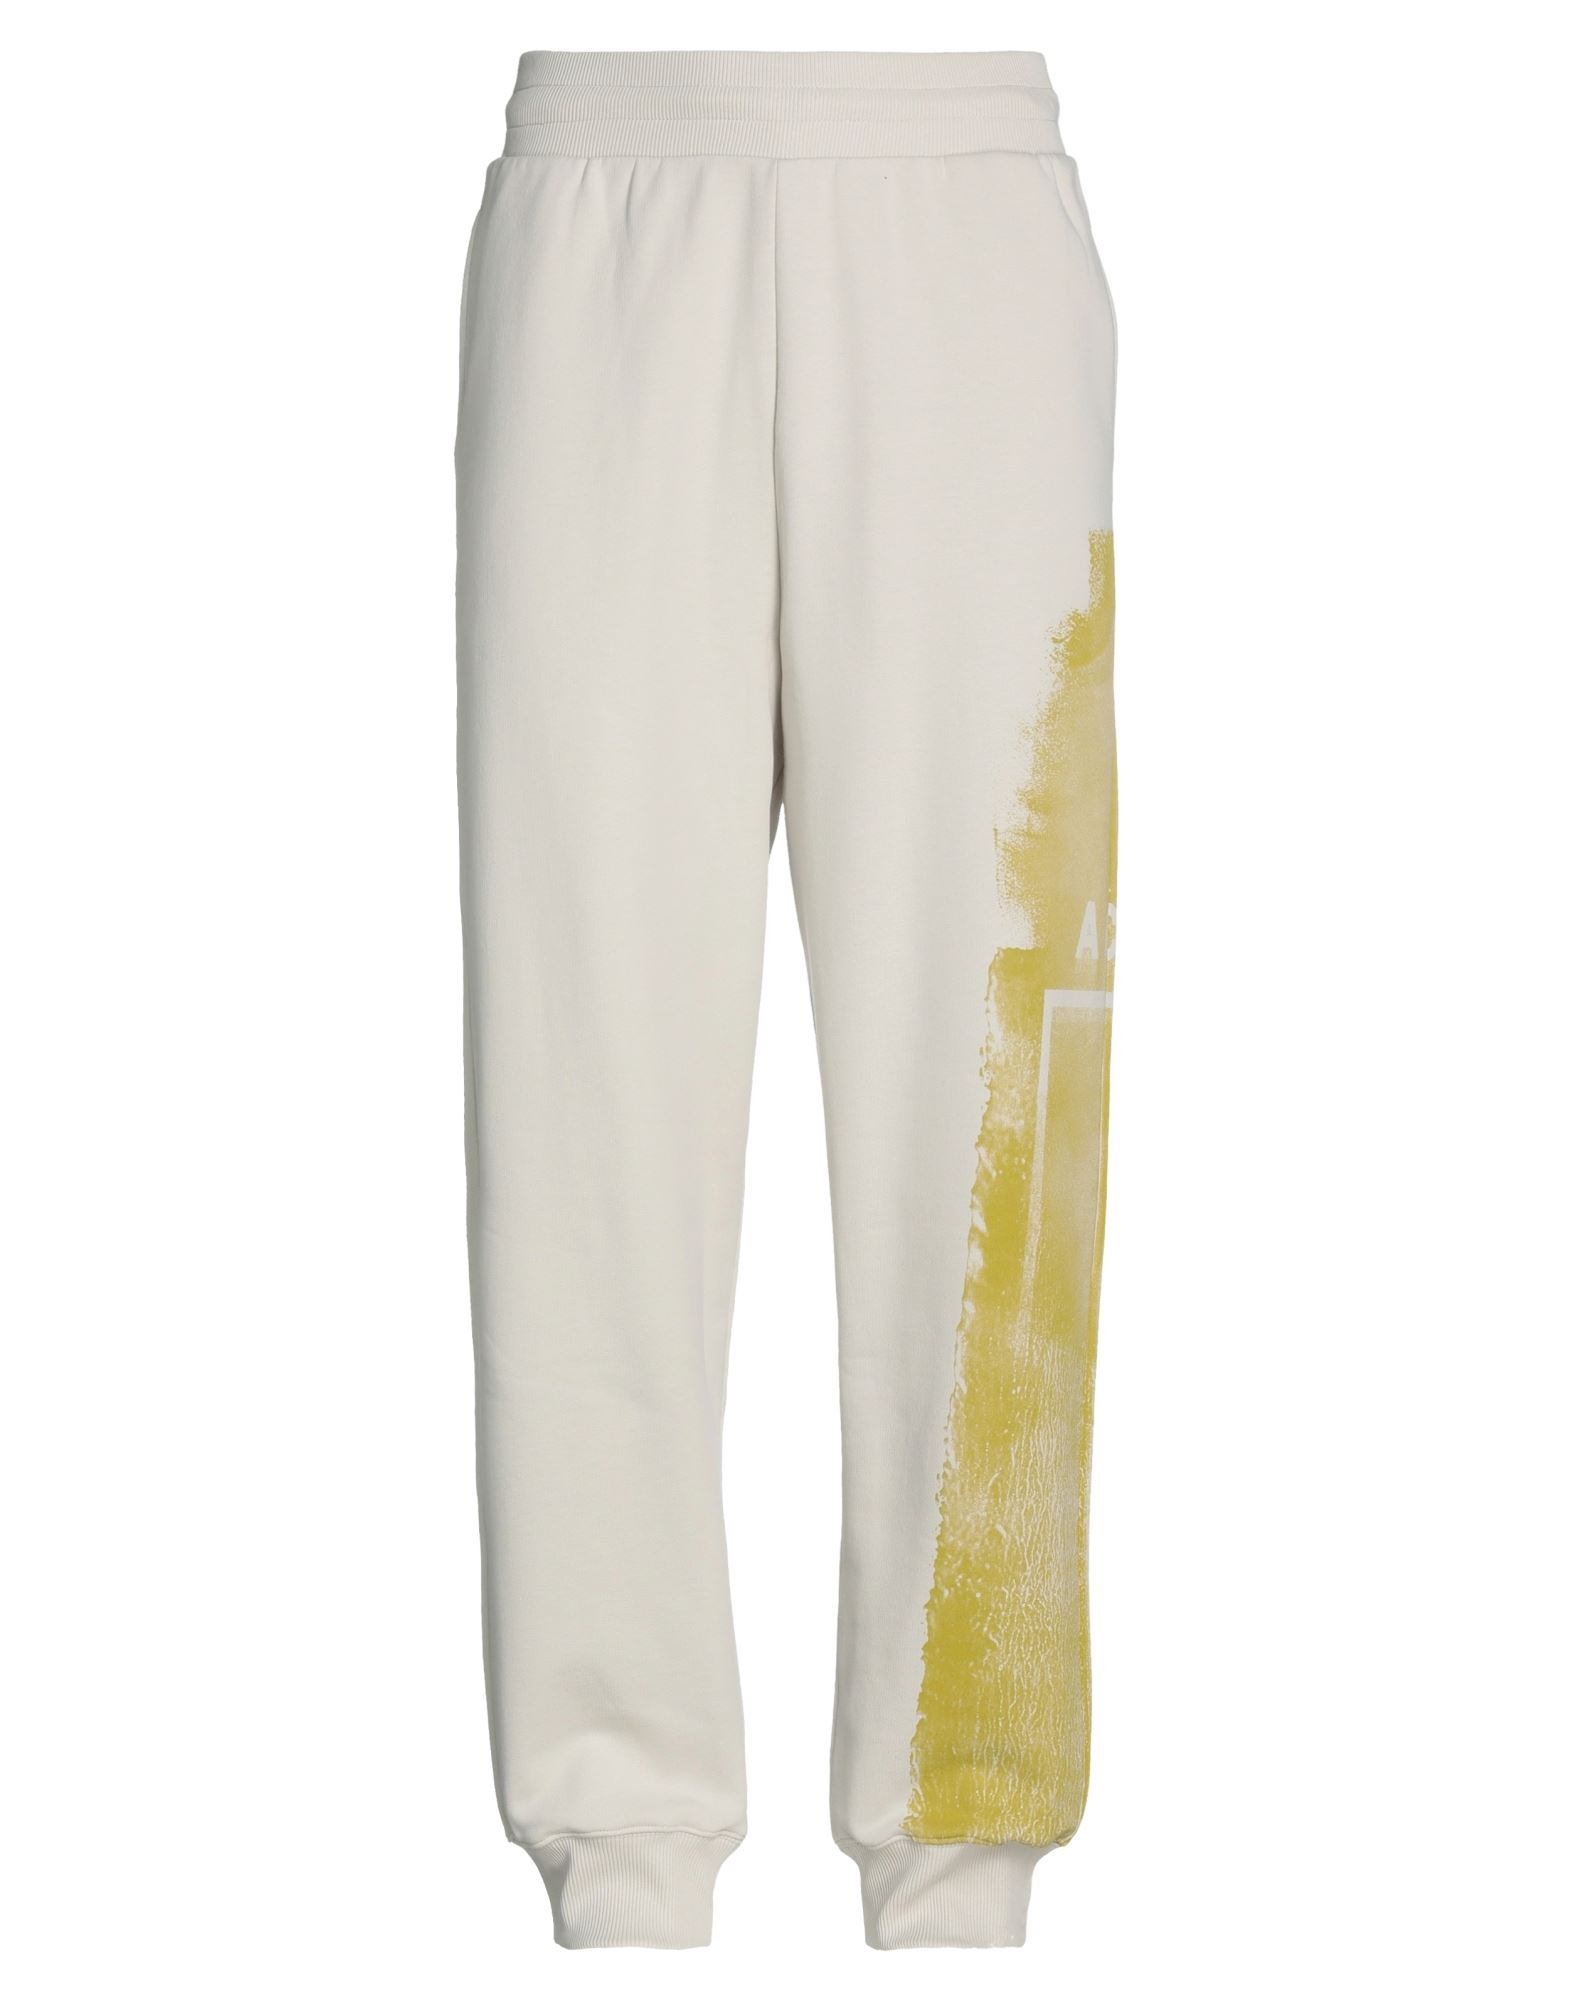 A-COLD-WALL* A-COLD-WALL* MAN PANTS IVORY SIZE S COTTON, ELASTANE